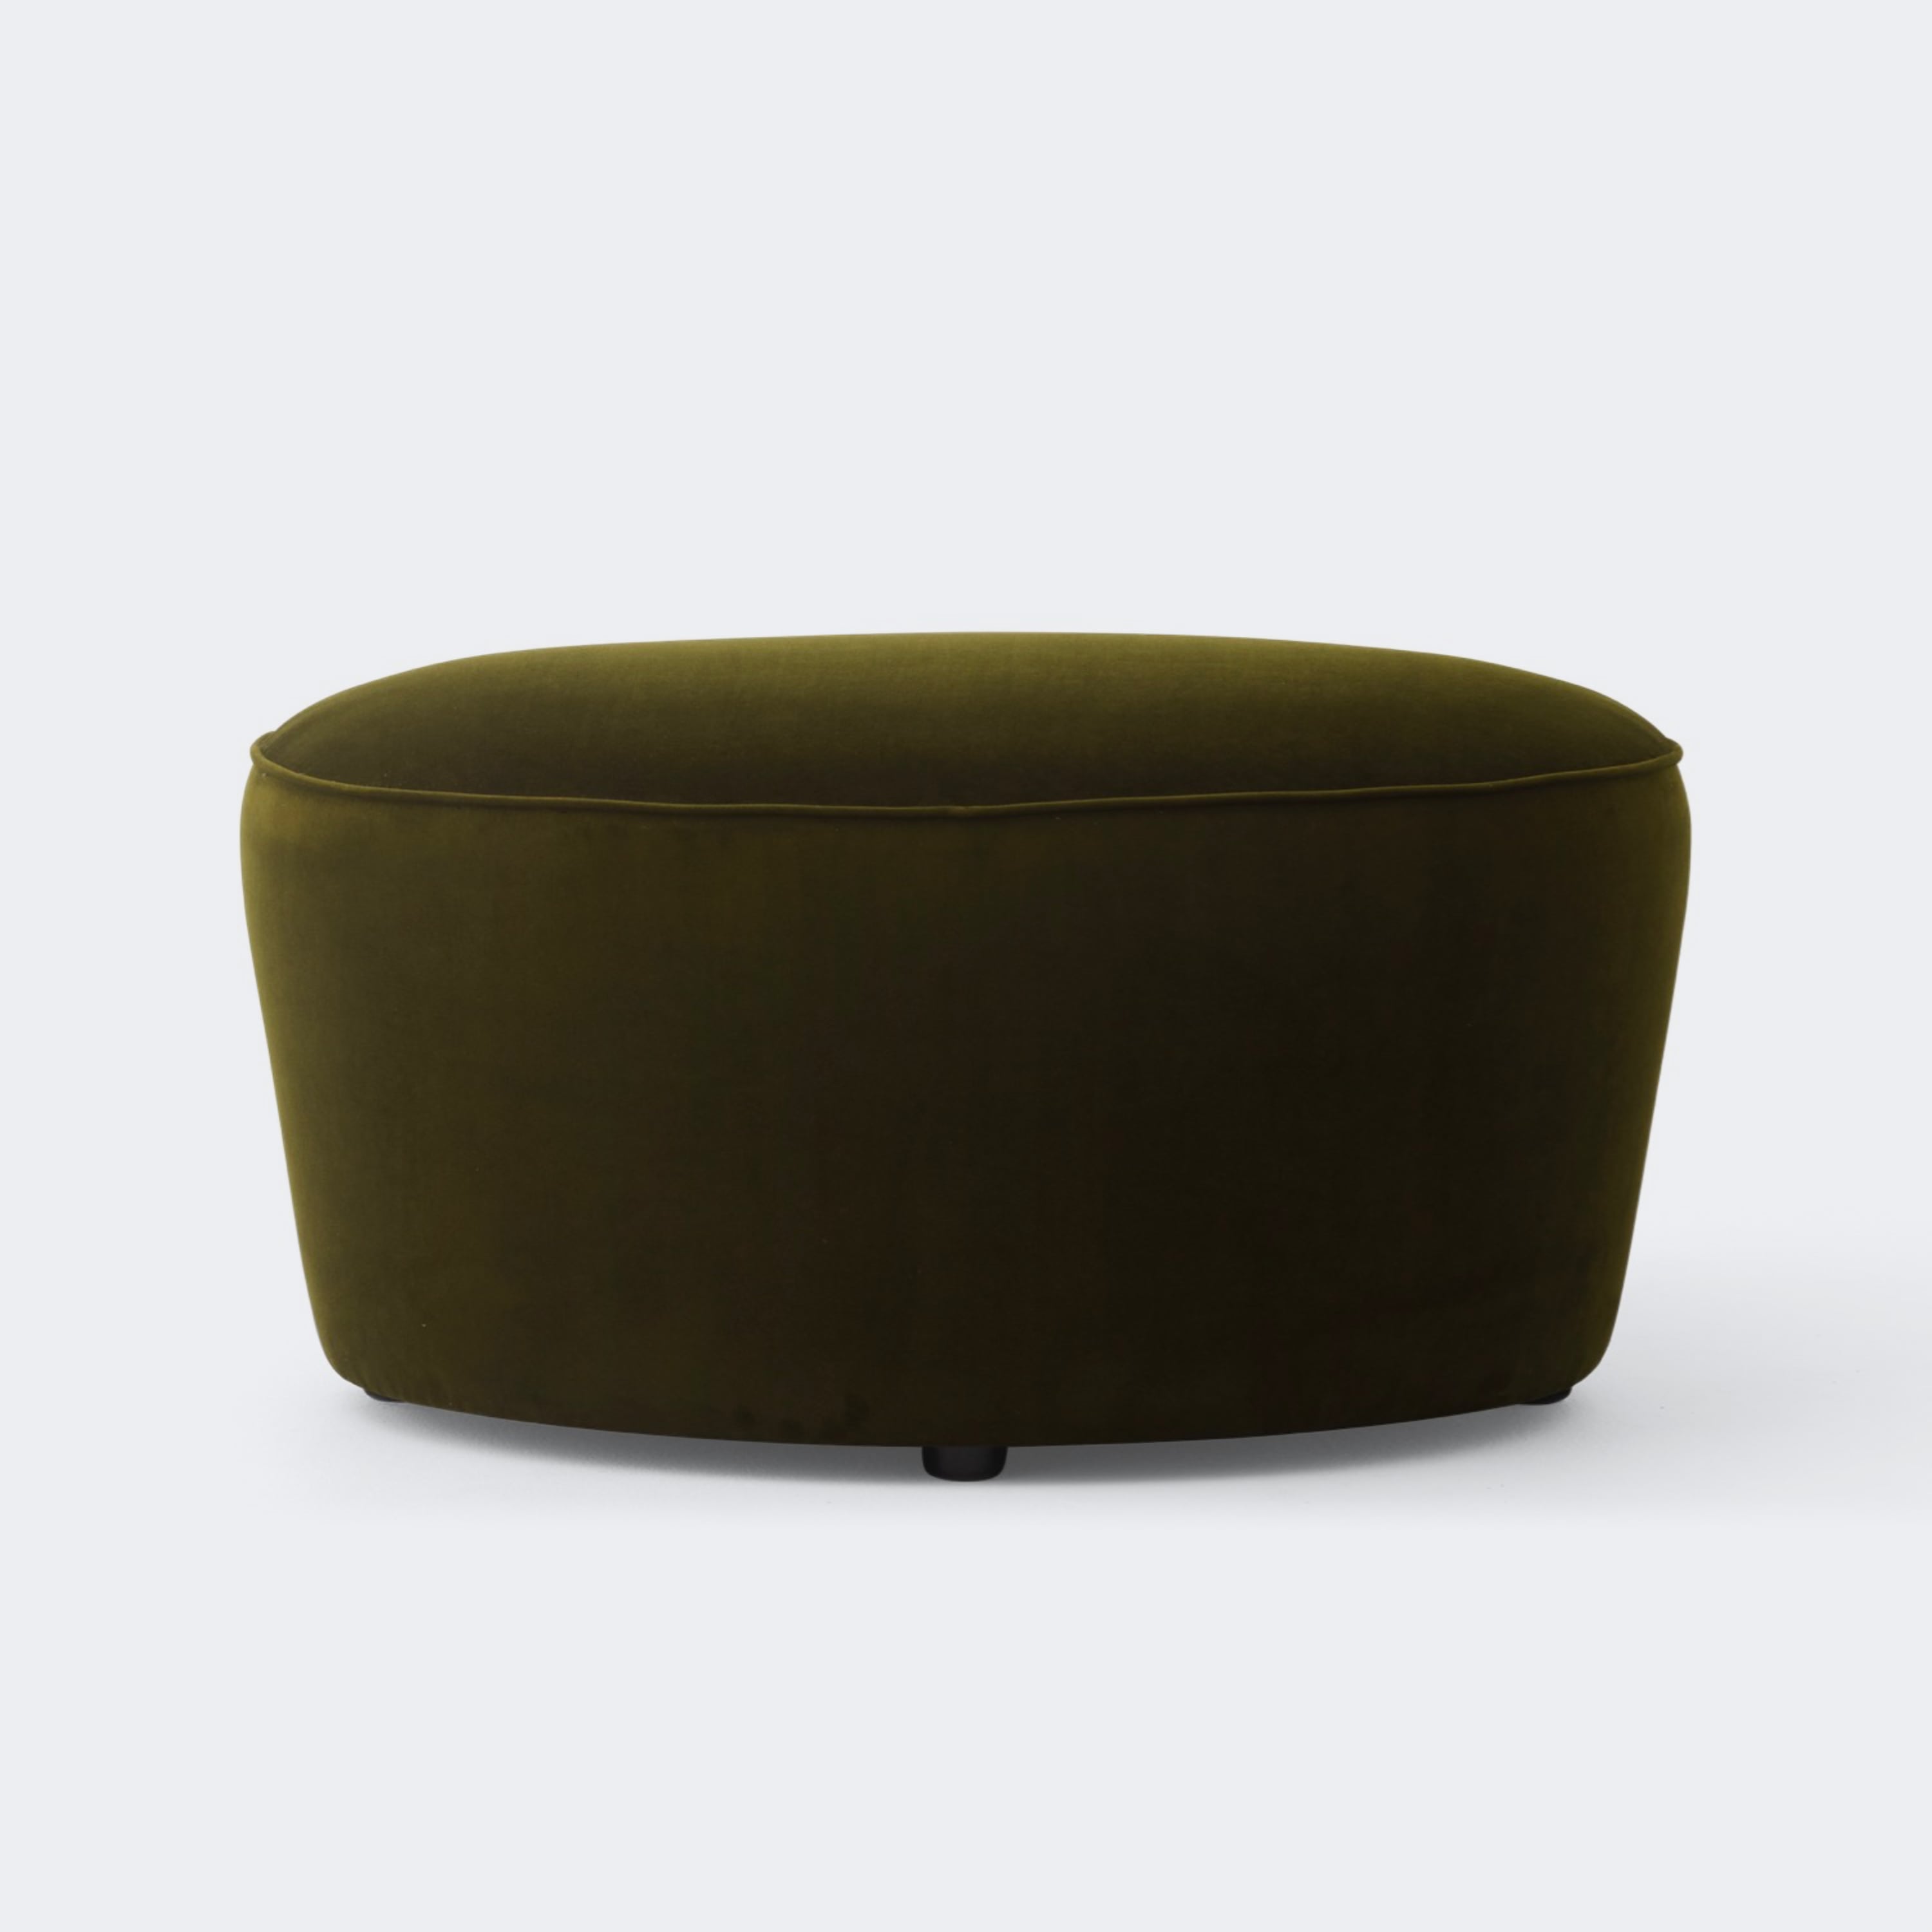 Audo Copenhagen Tearoom Cairn Pouf Made To Order (12-14 Weeks) Oval (35in x 28in) Champion #035 - KANSO